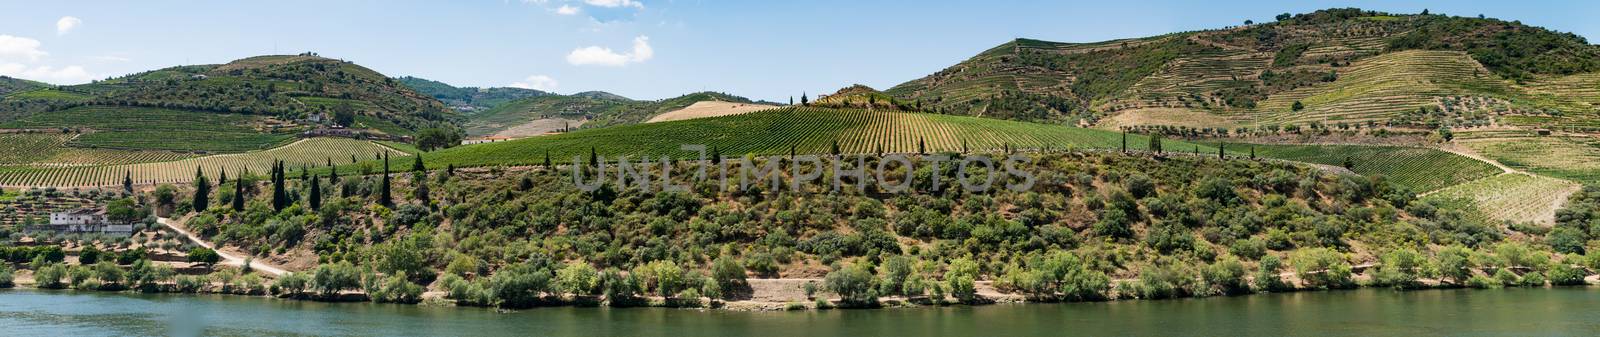 Point of view shot of terraced vineyards in Douro Valley by homydesign